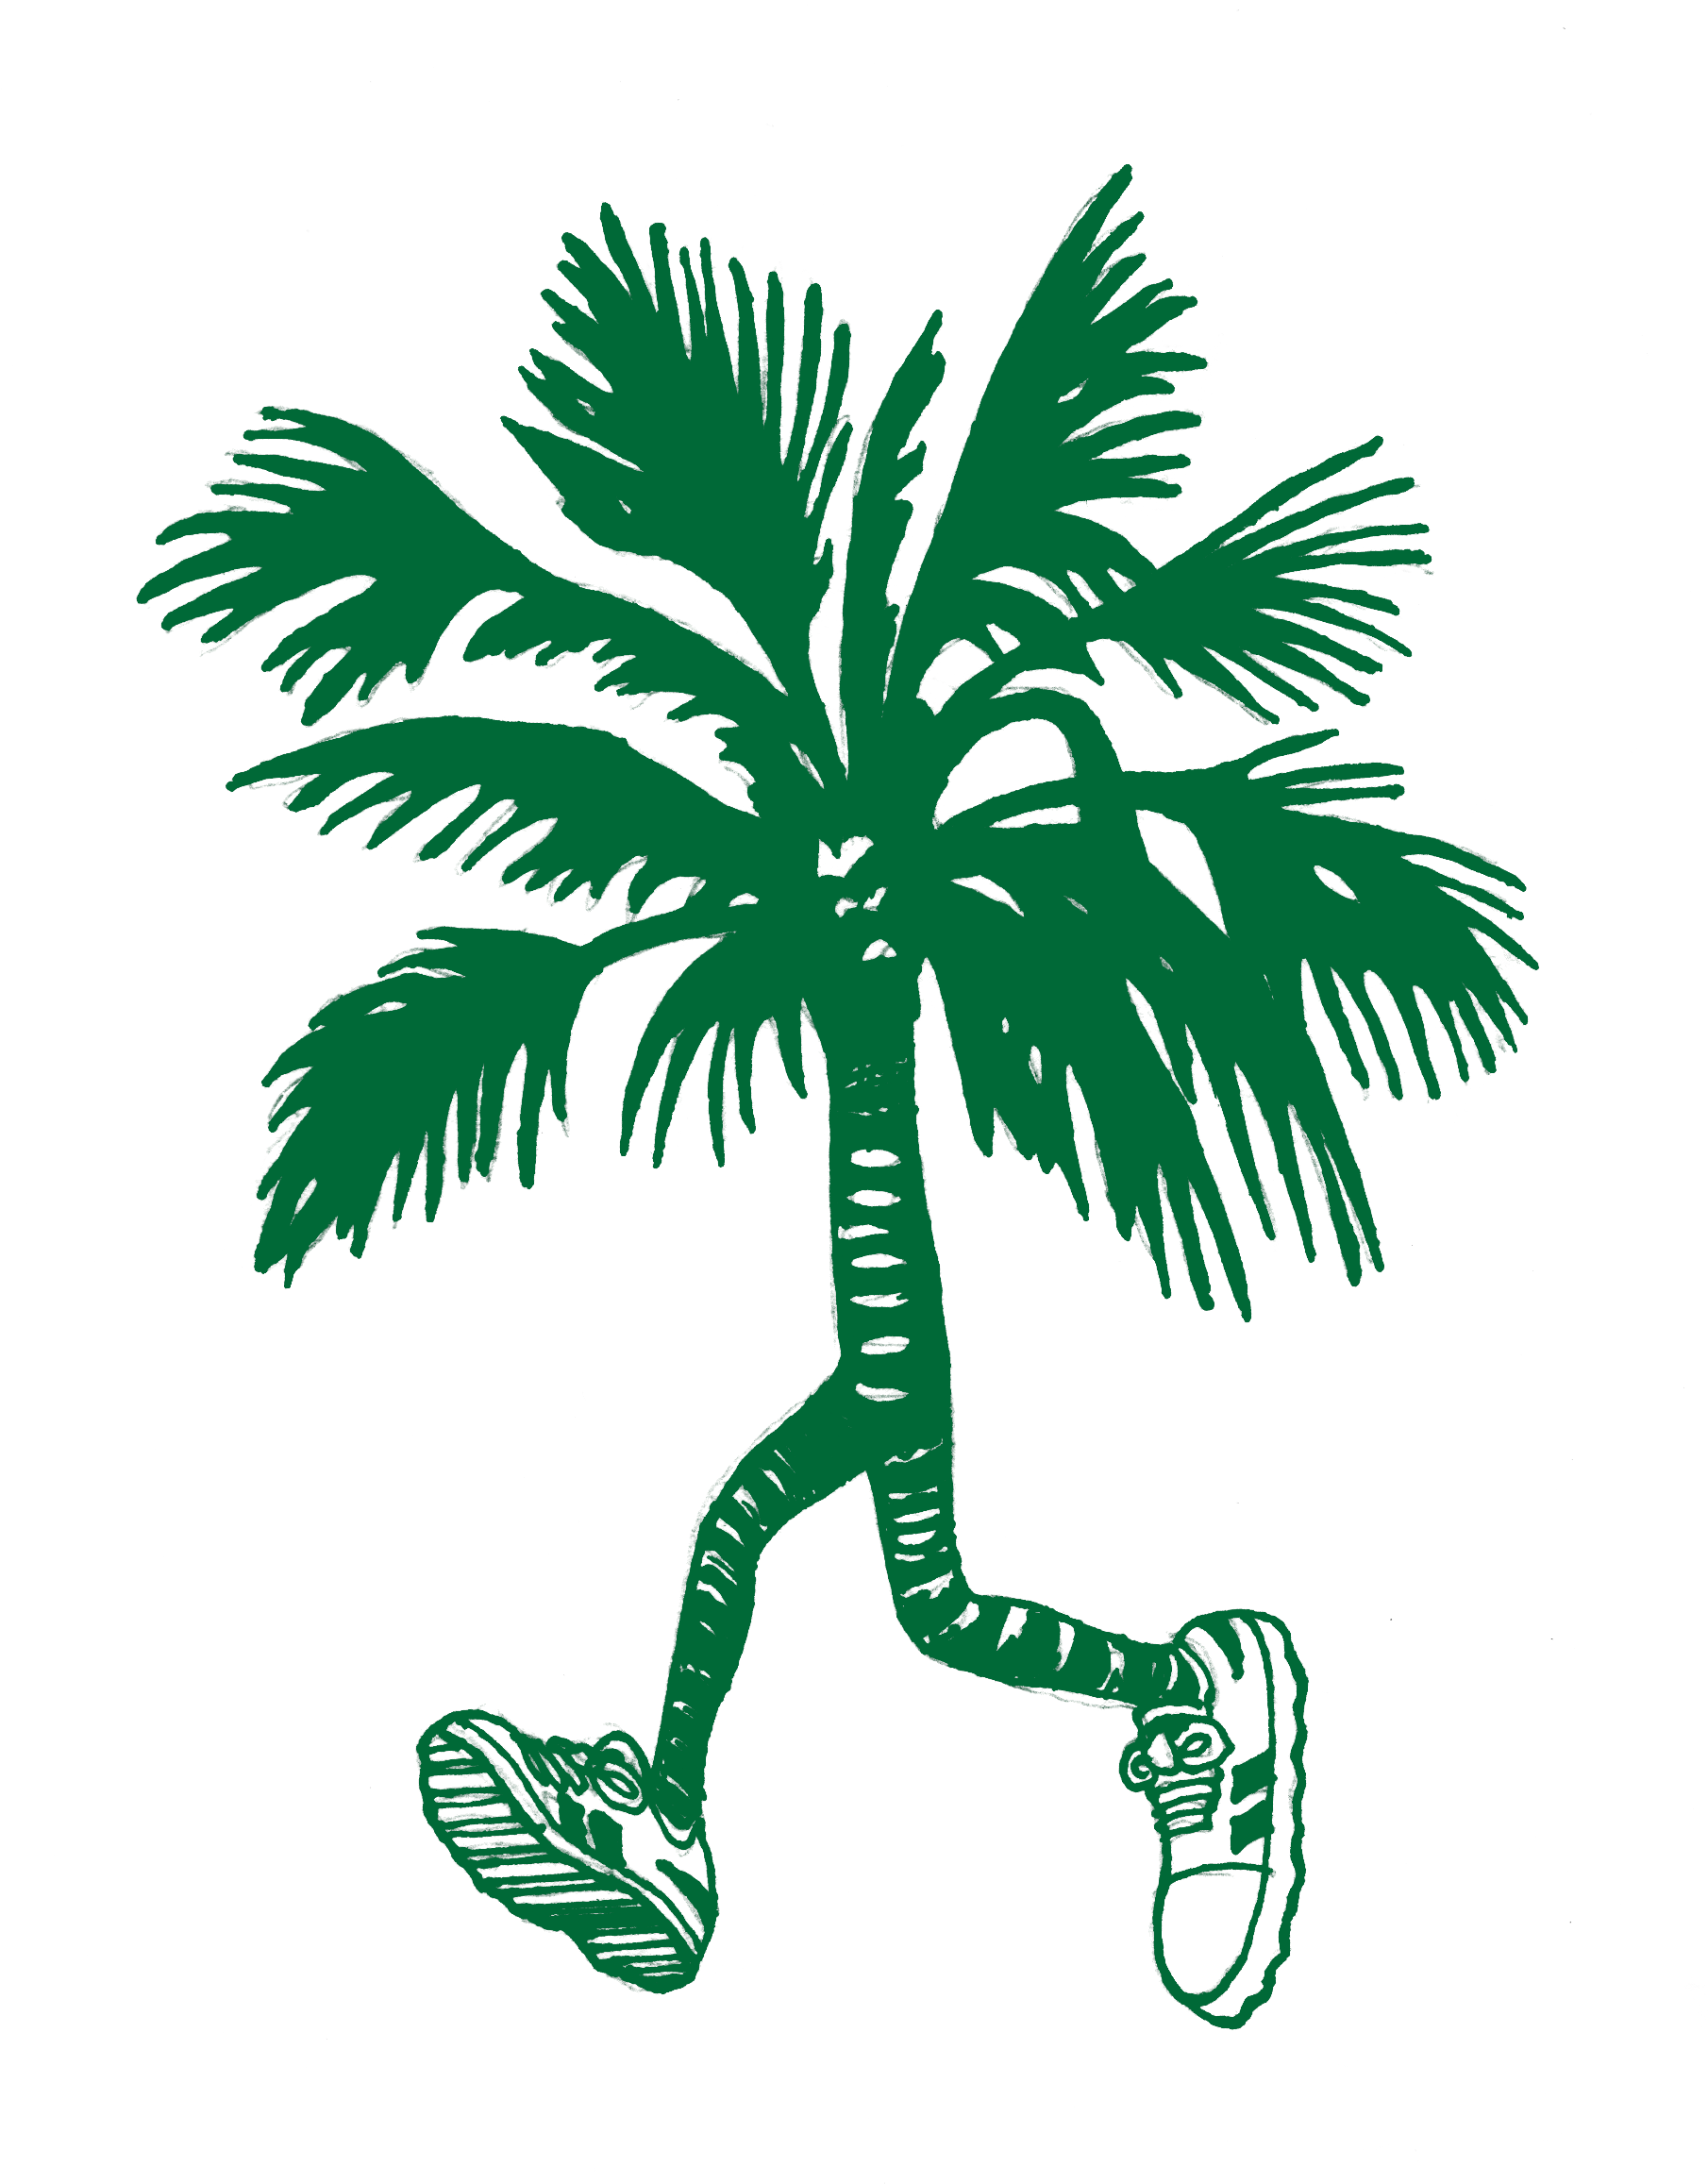 Register Now To Complete 25,000 Steps By March 25, - Sabal Palmetto (1813x2333)